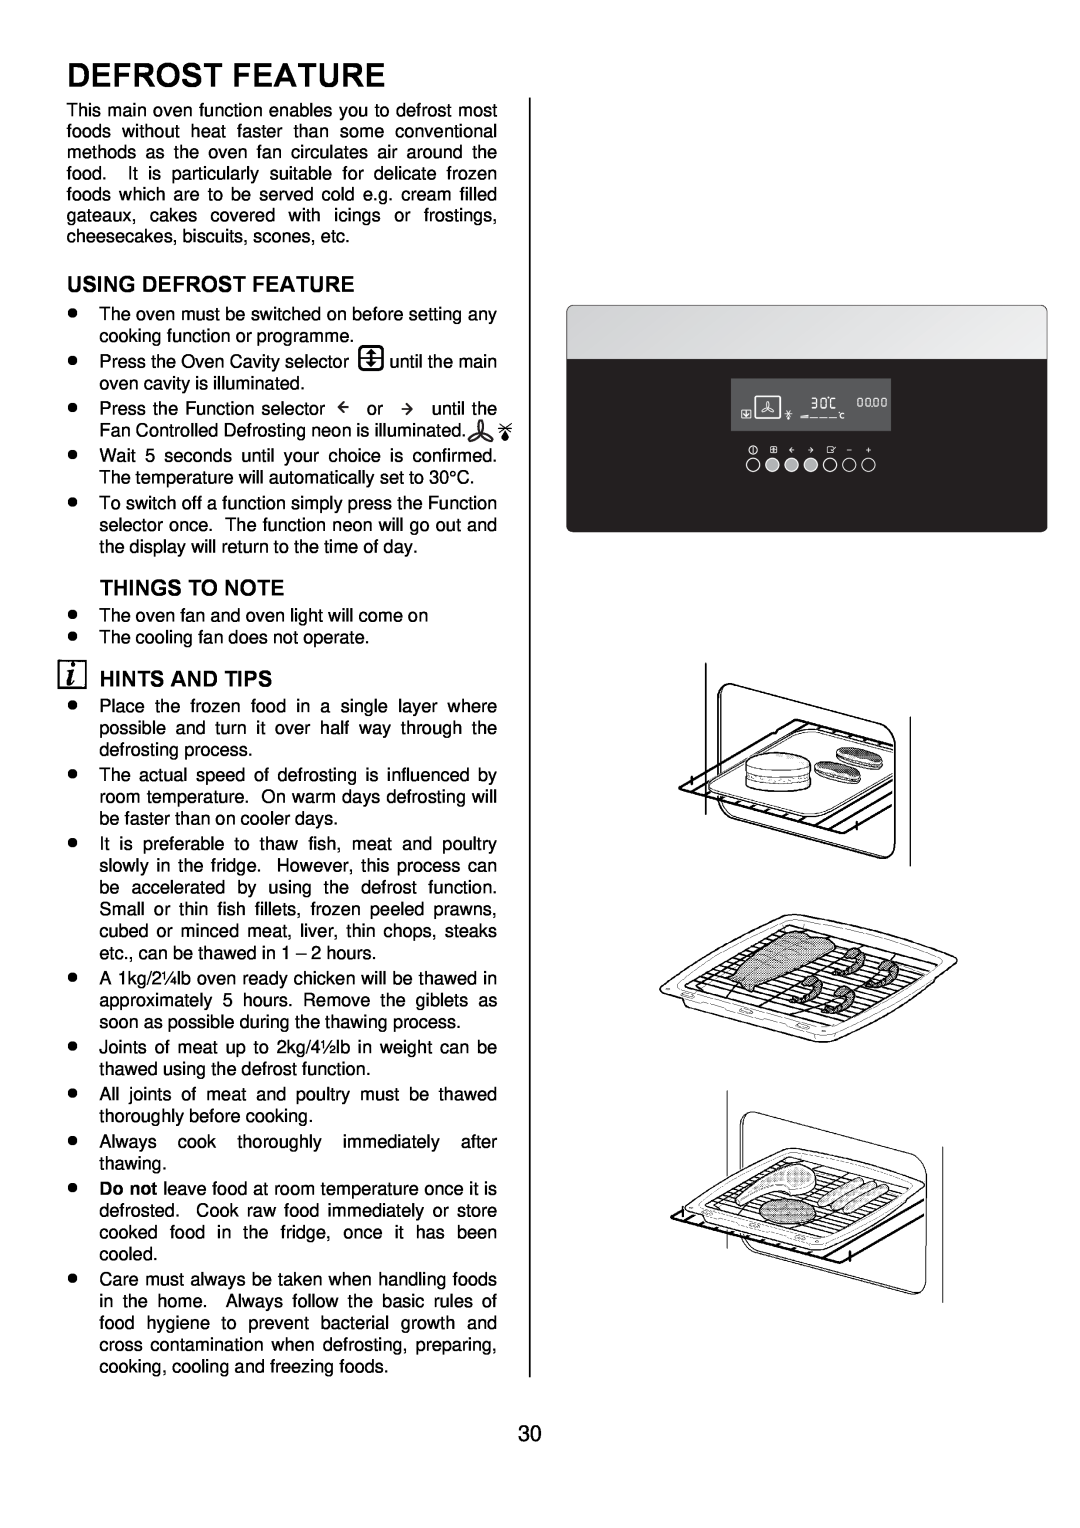 Zanussi ZOD 685 manual Using Defrost Feature, Things To Note, Hints And Tips 